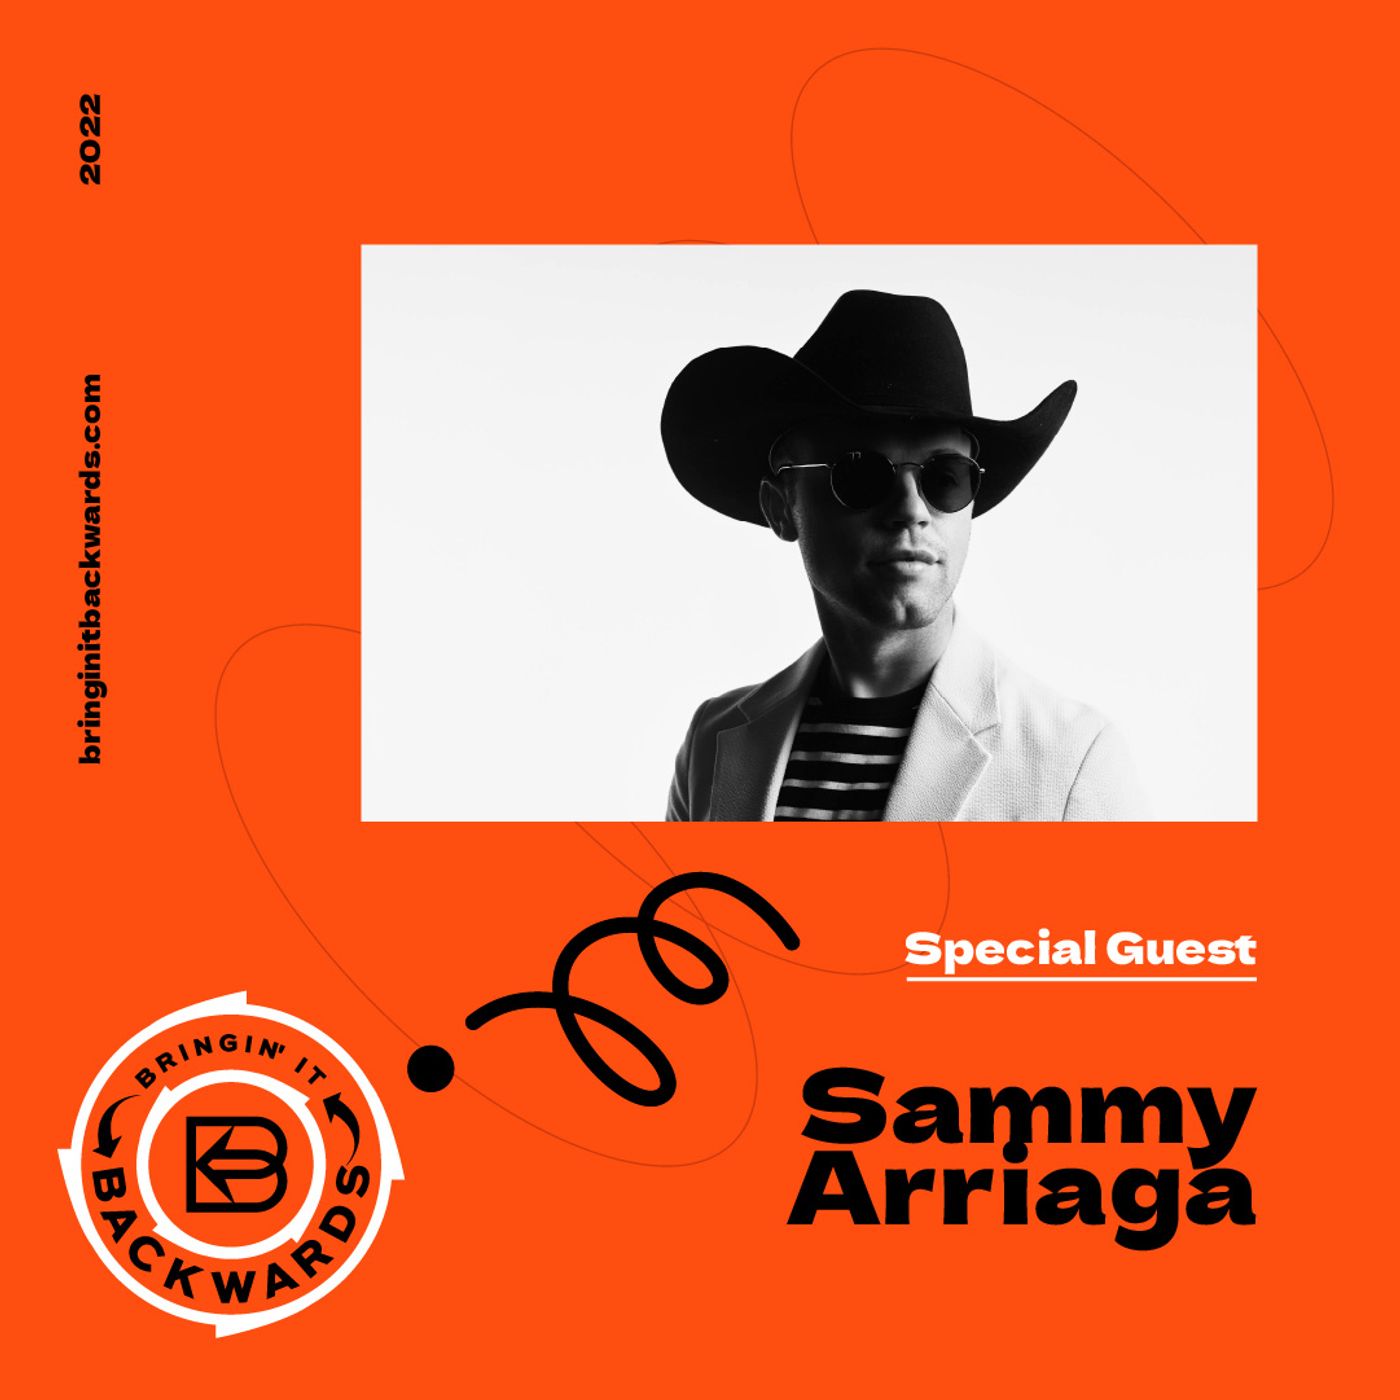 Interview with Sammy Arriaga